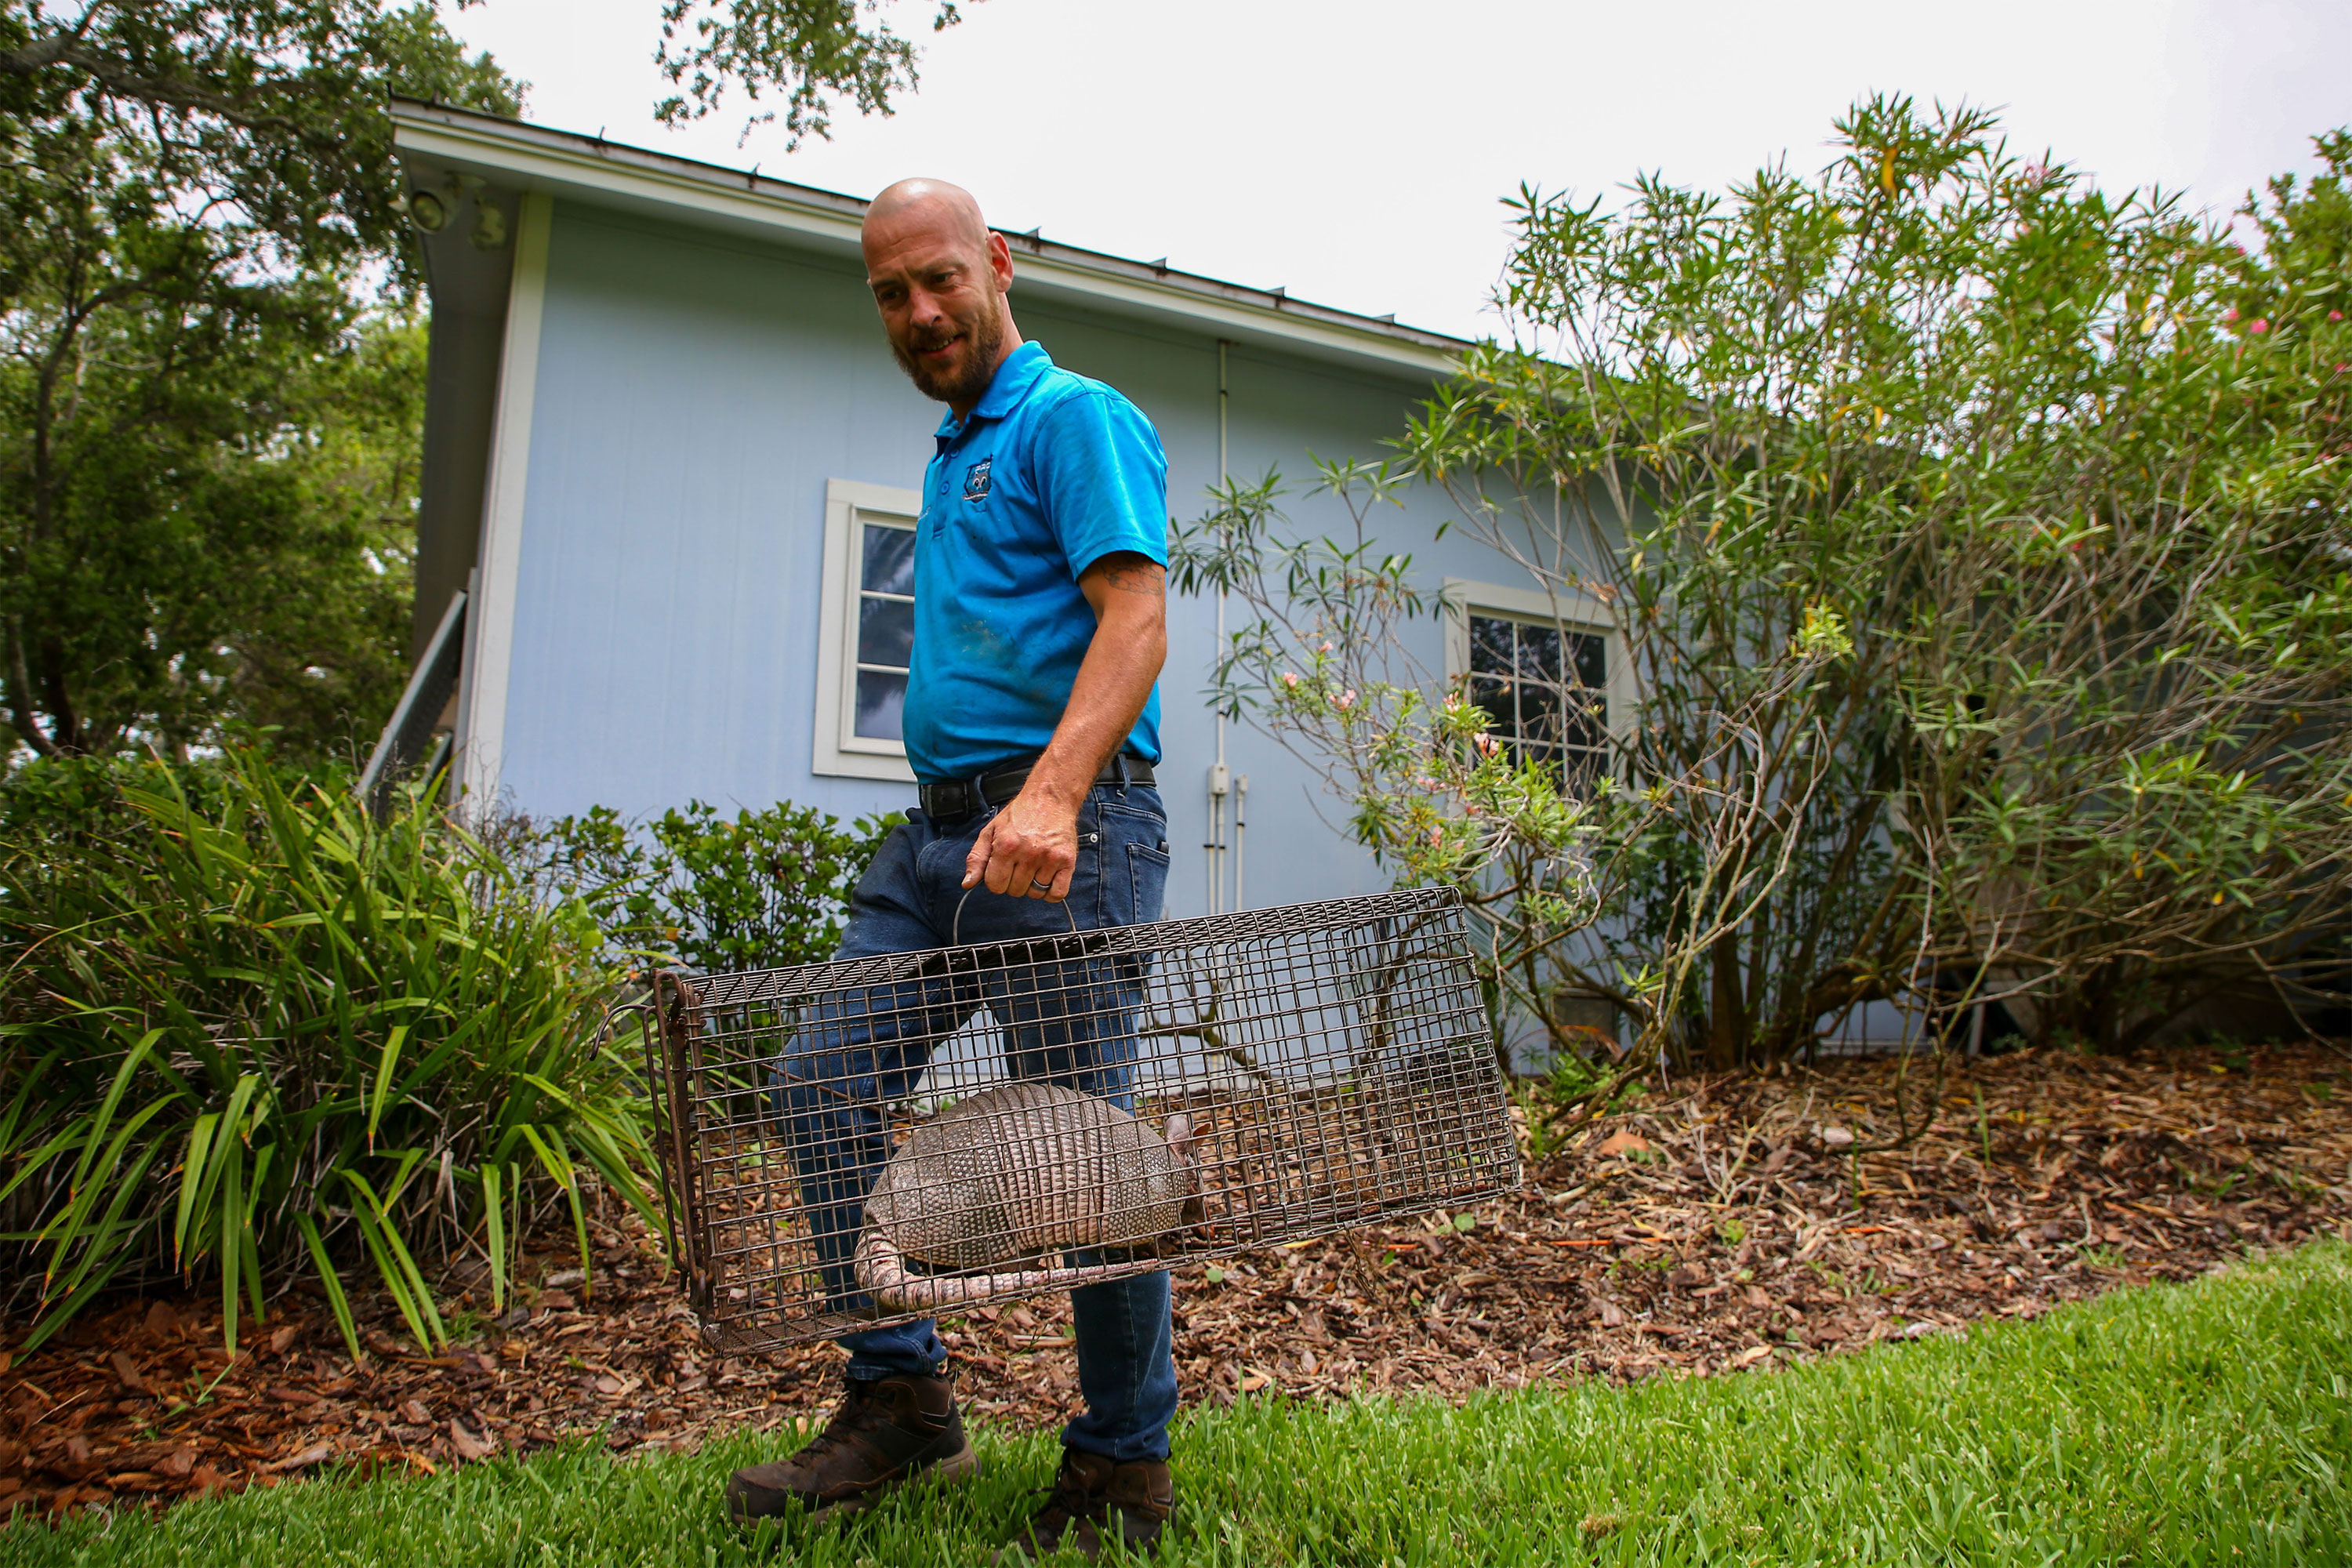 A photo of man walking while holding a caged with an armadillo in it.